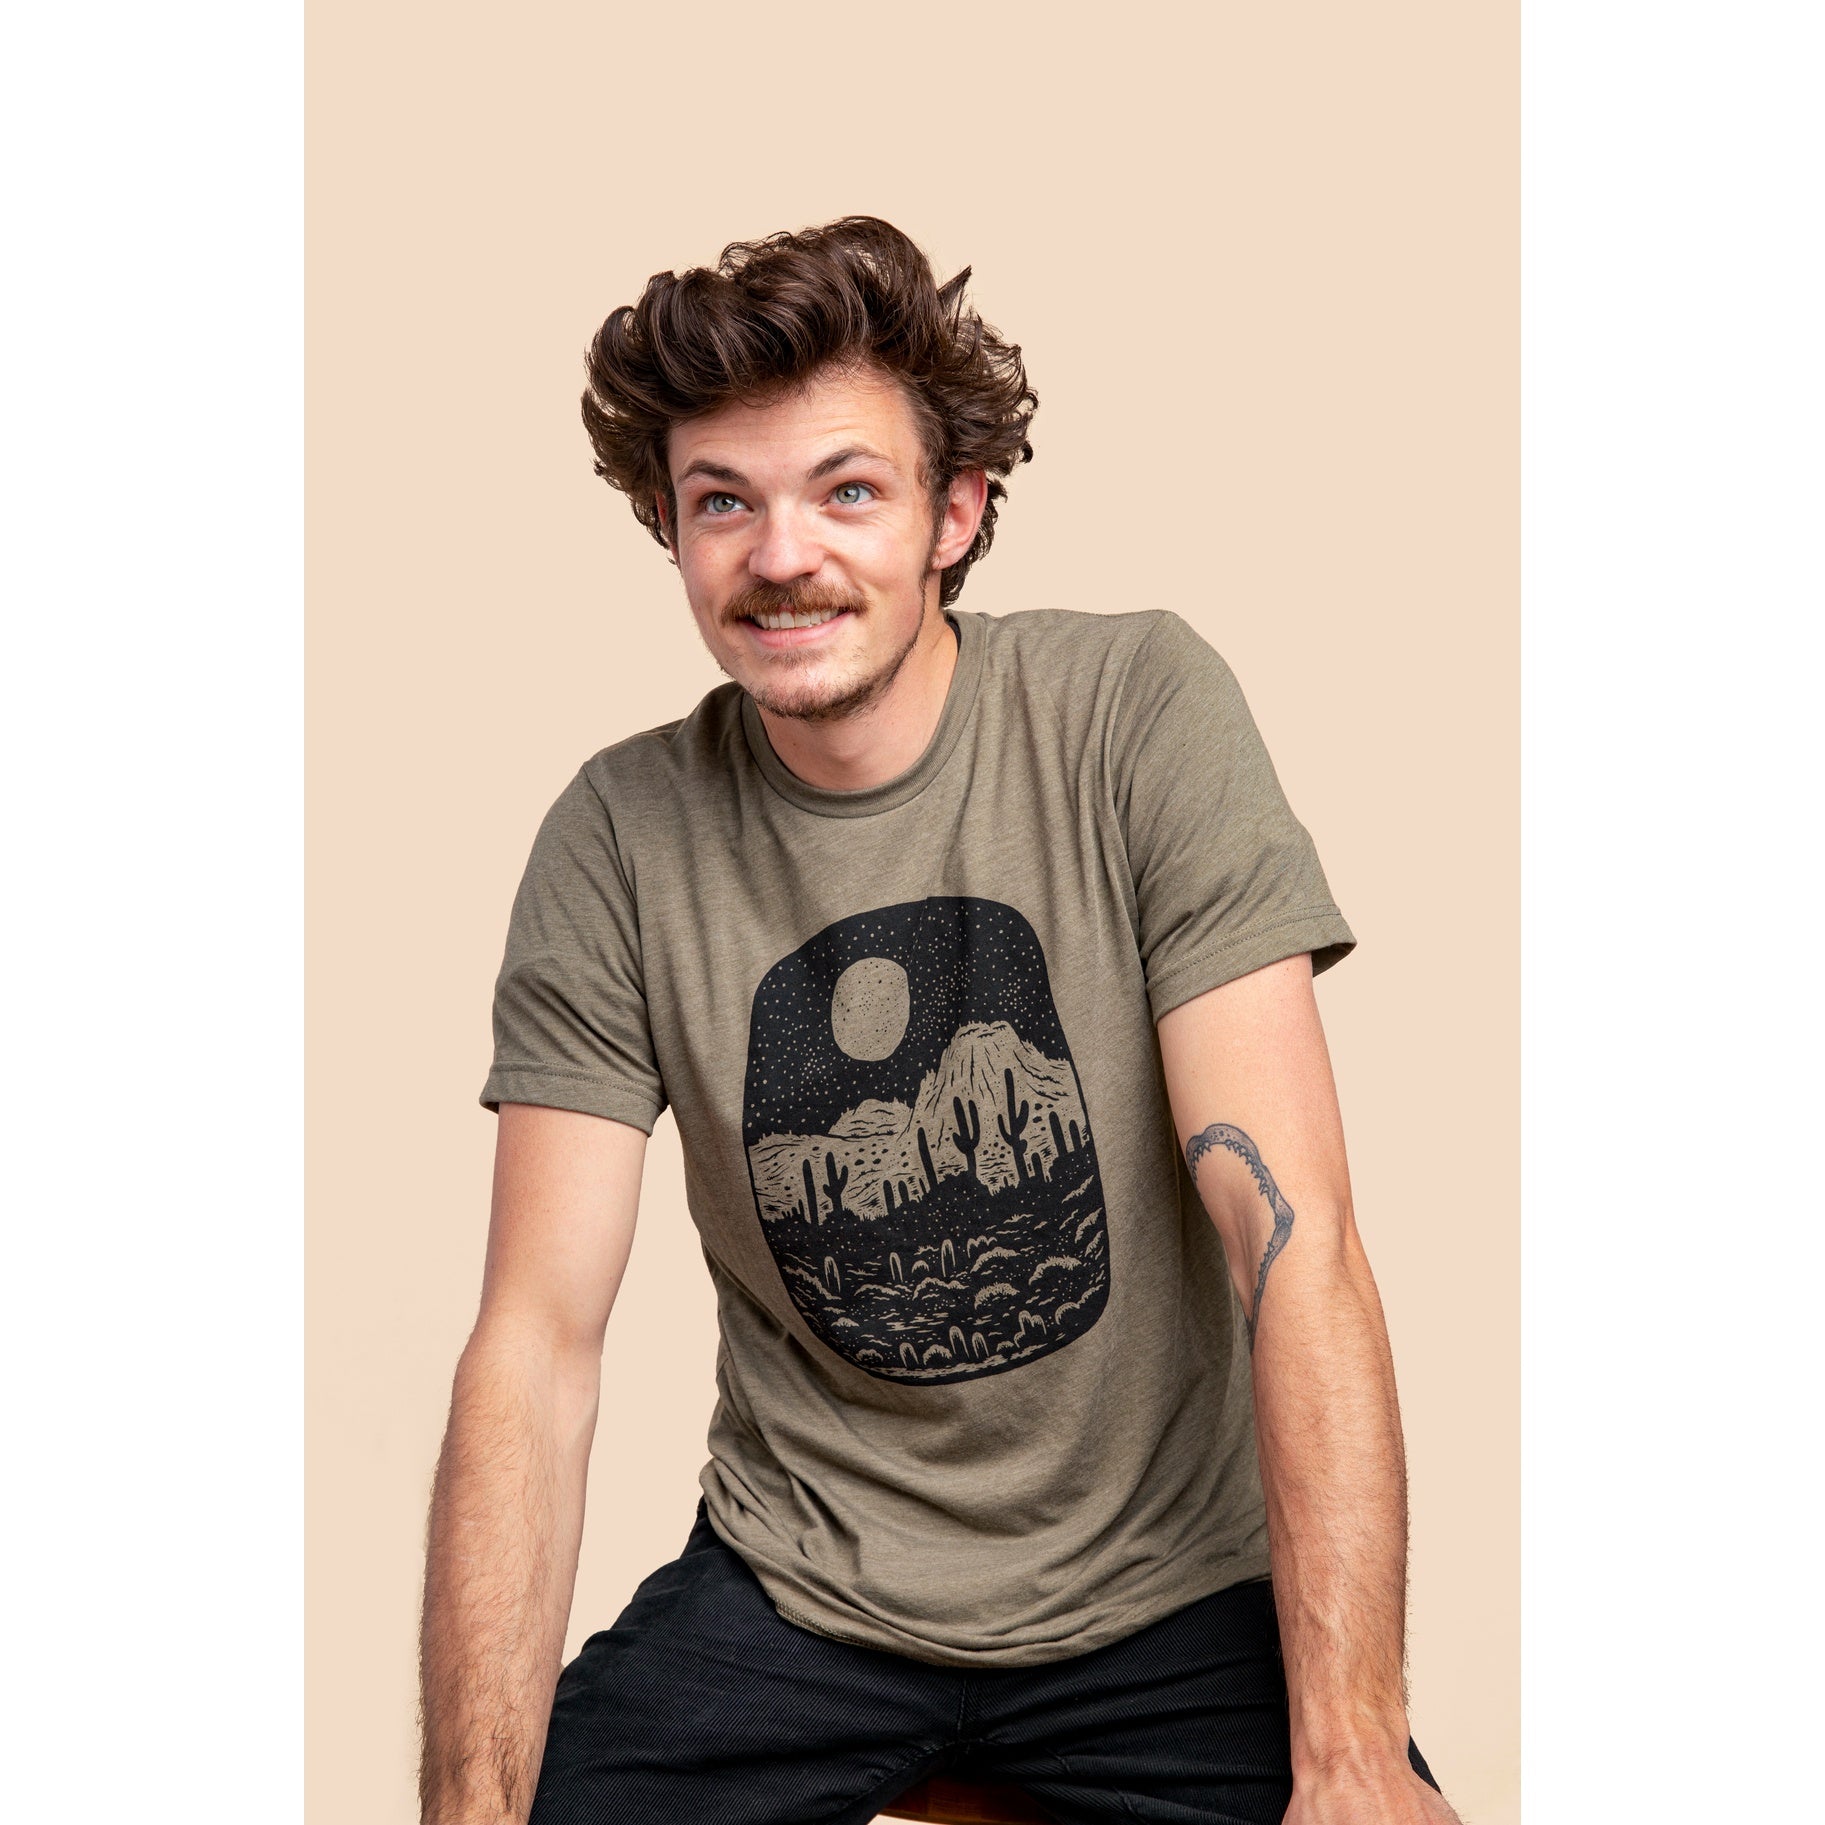 The Olive Night Butte Tee by Moore Collection